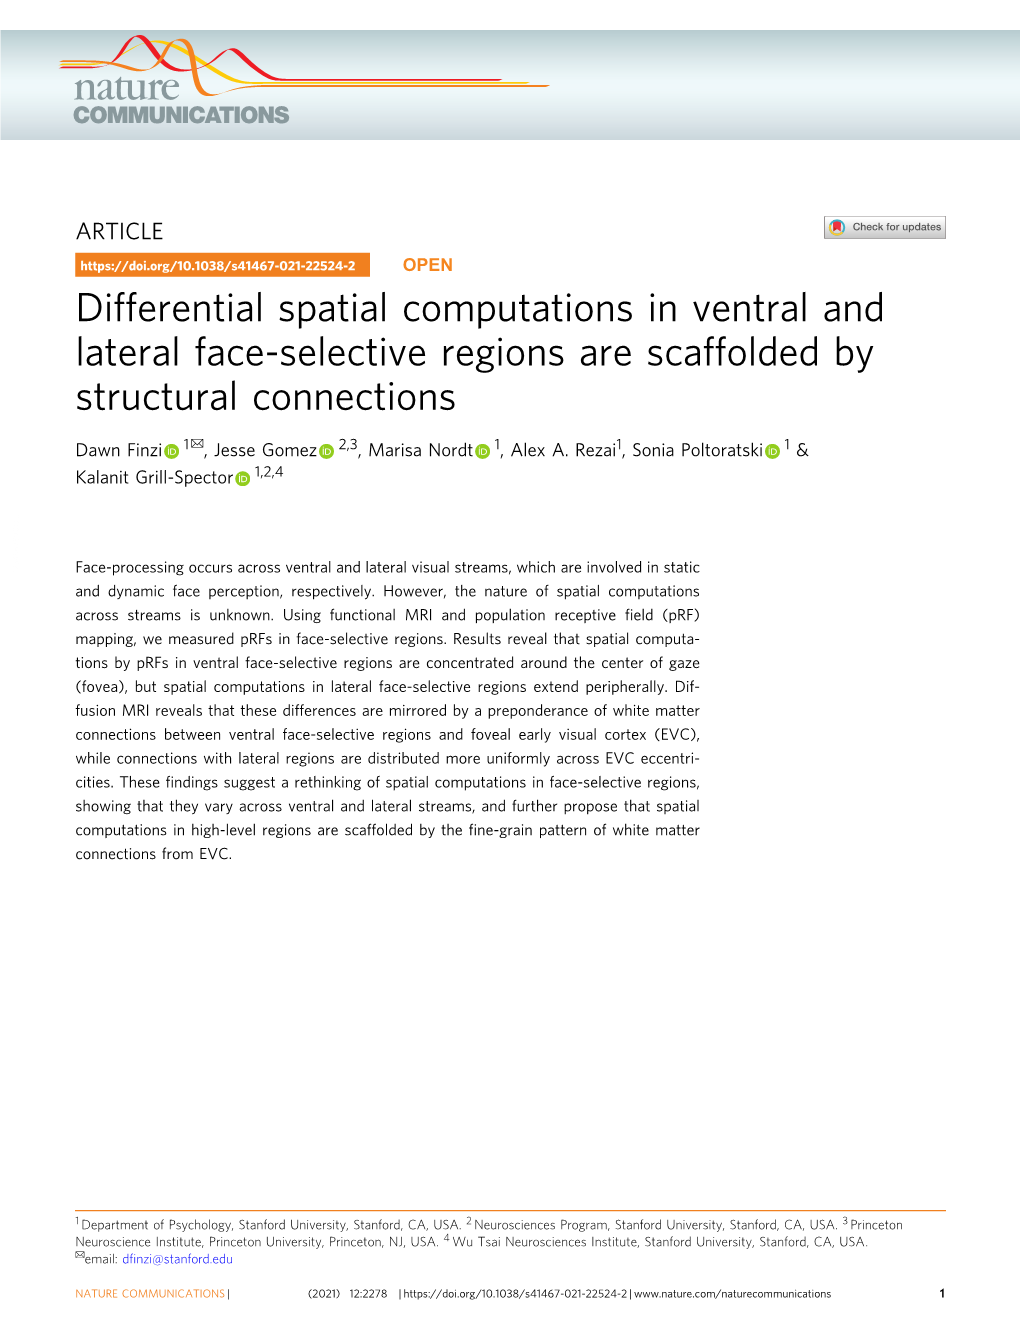 Differential Spatial Computations in Ventral and Lateral Face-Selective